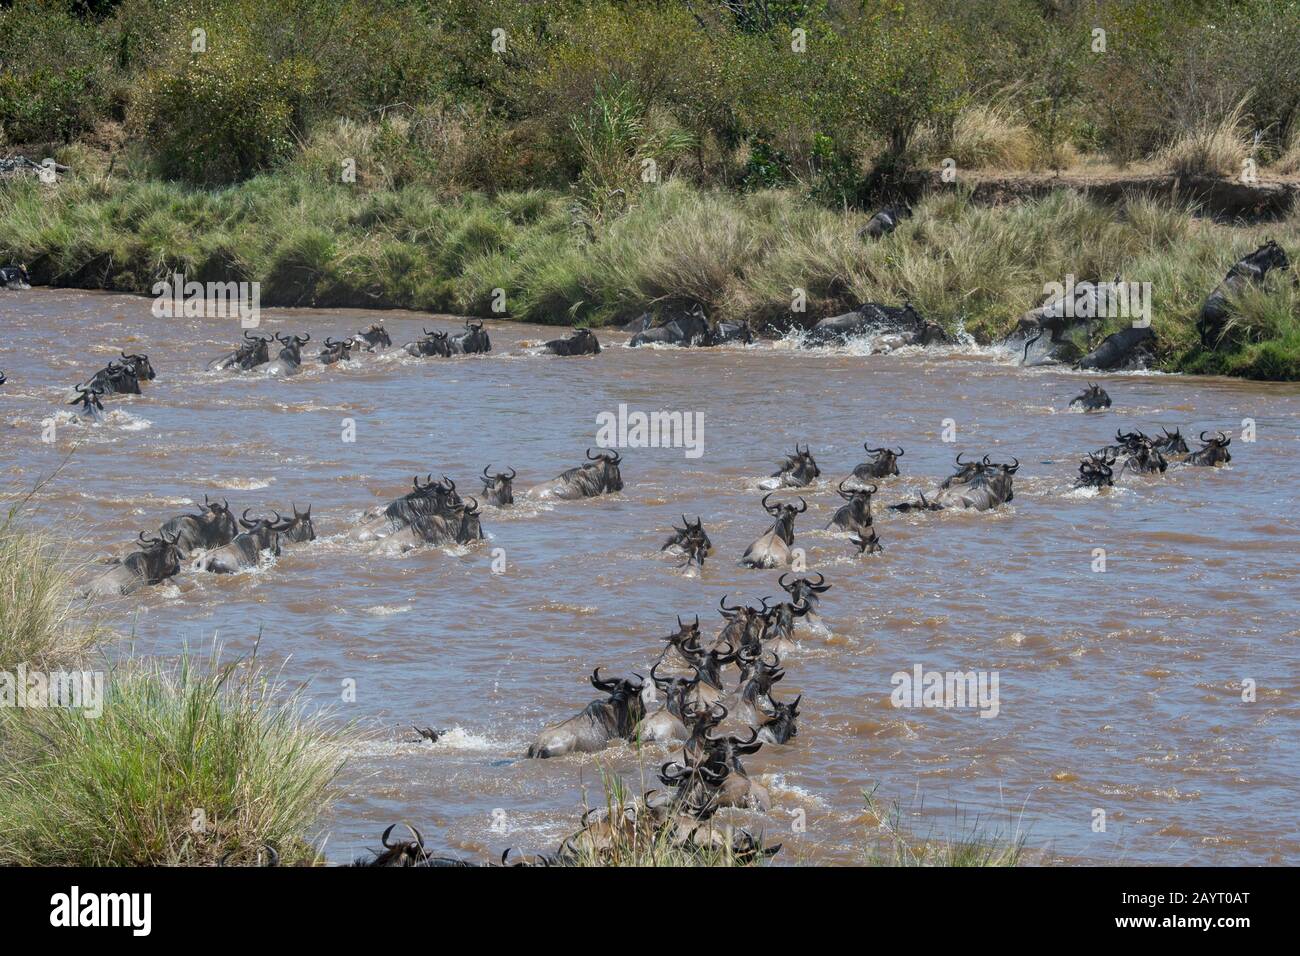 Wildebeests, also called gnus or wildebai, crossing the Mara River in the Masai Mara National Reserve in Kenya during their annual migration. Stock Photo